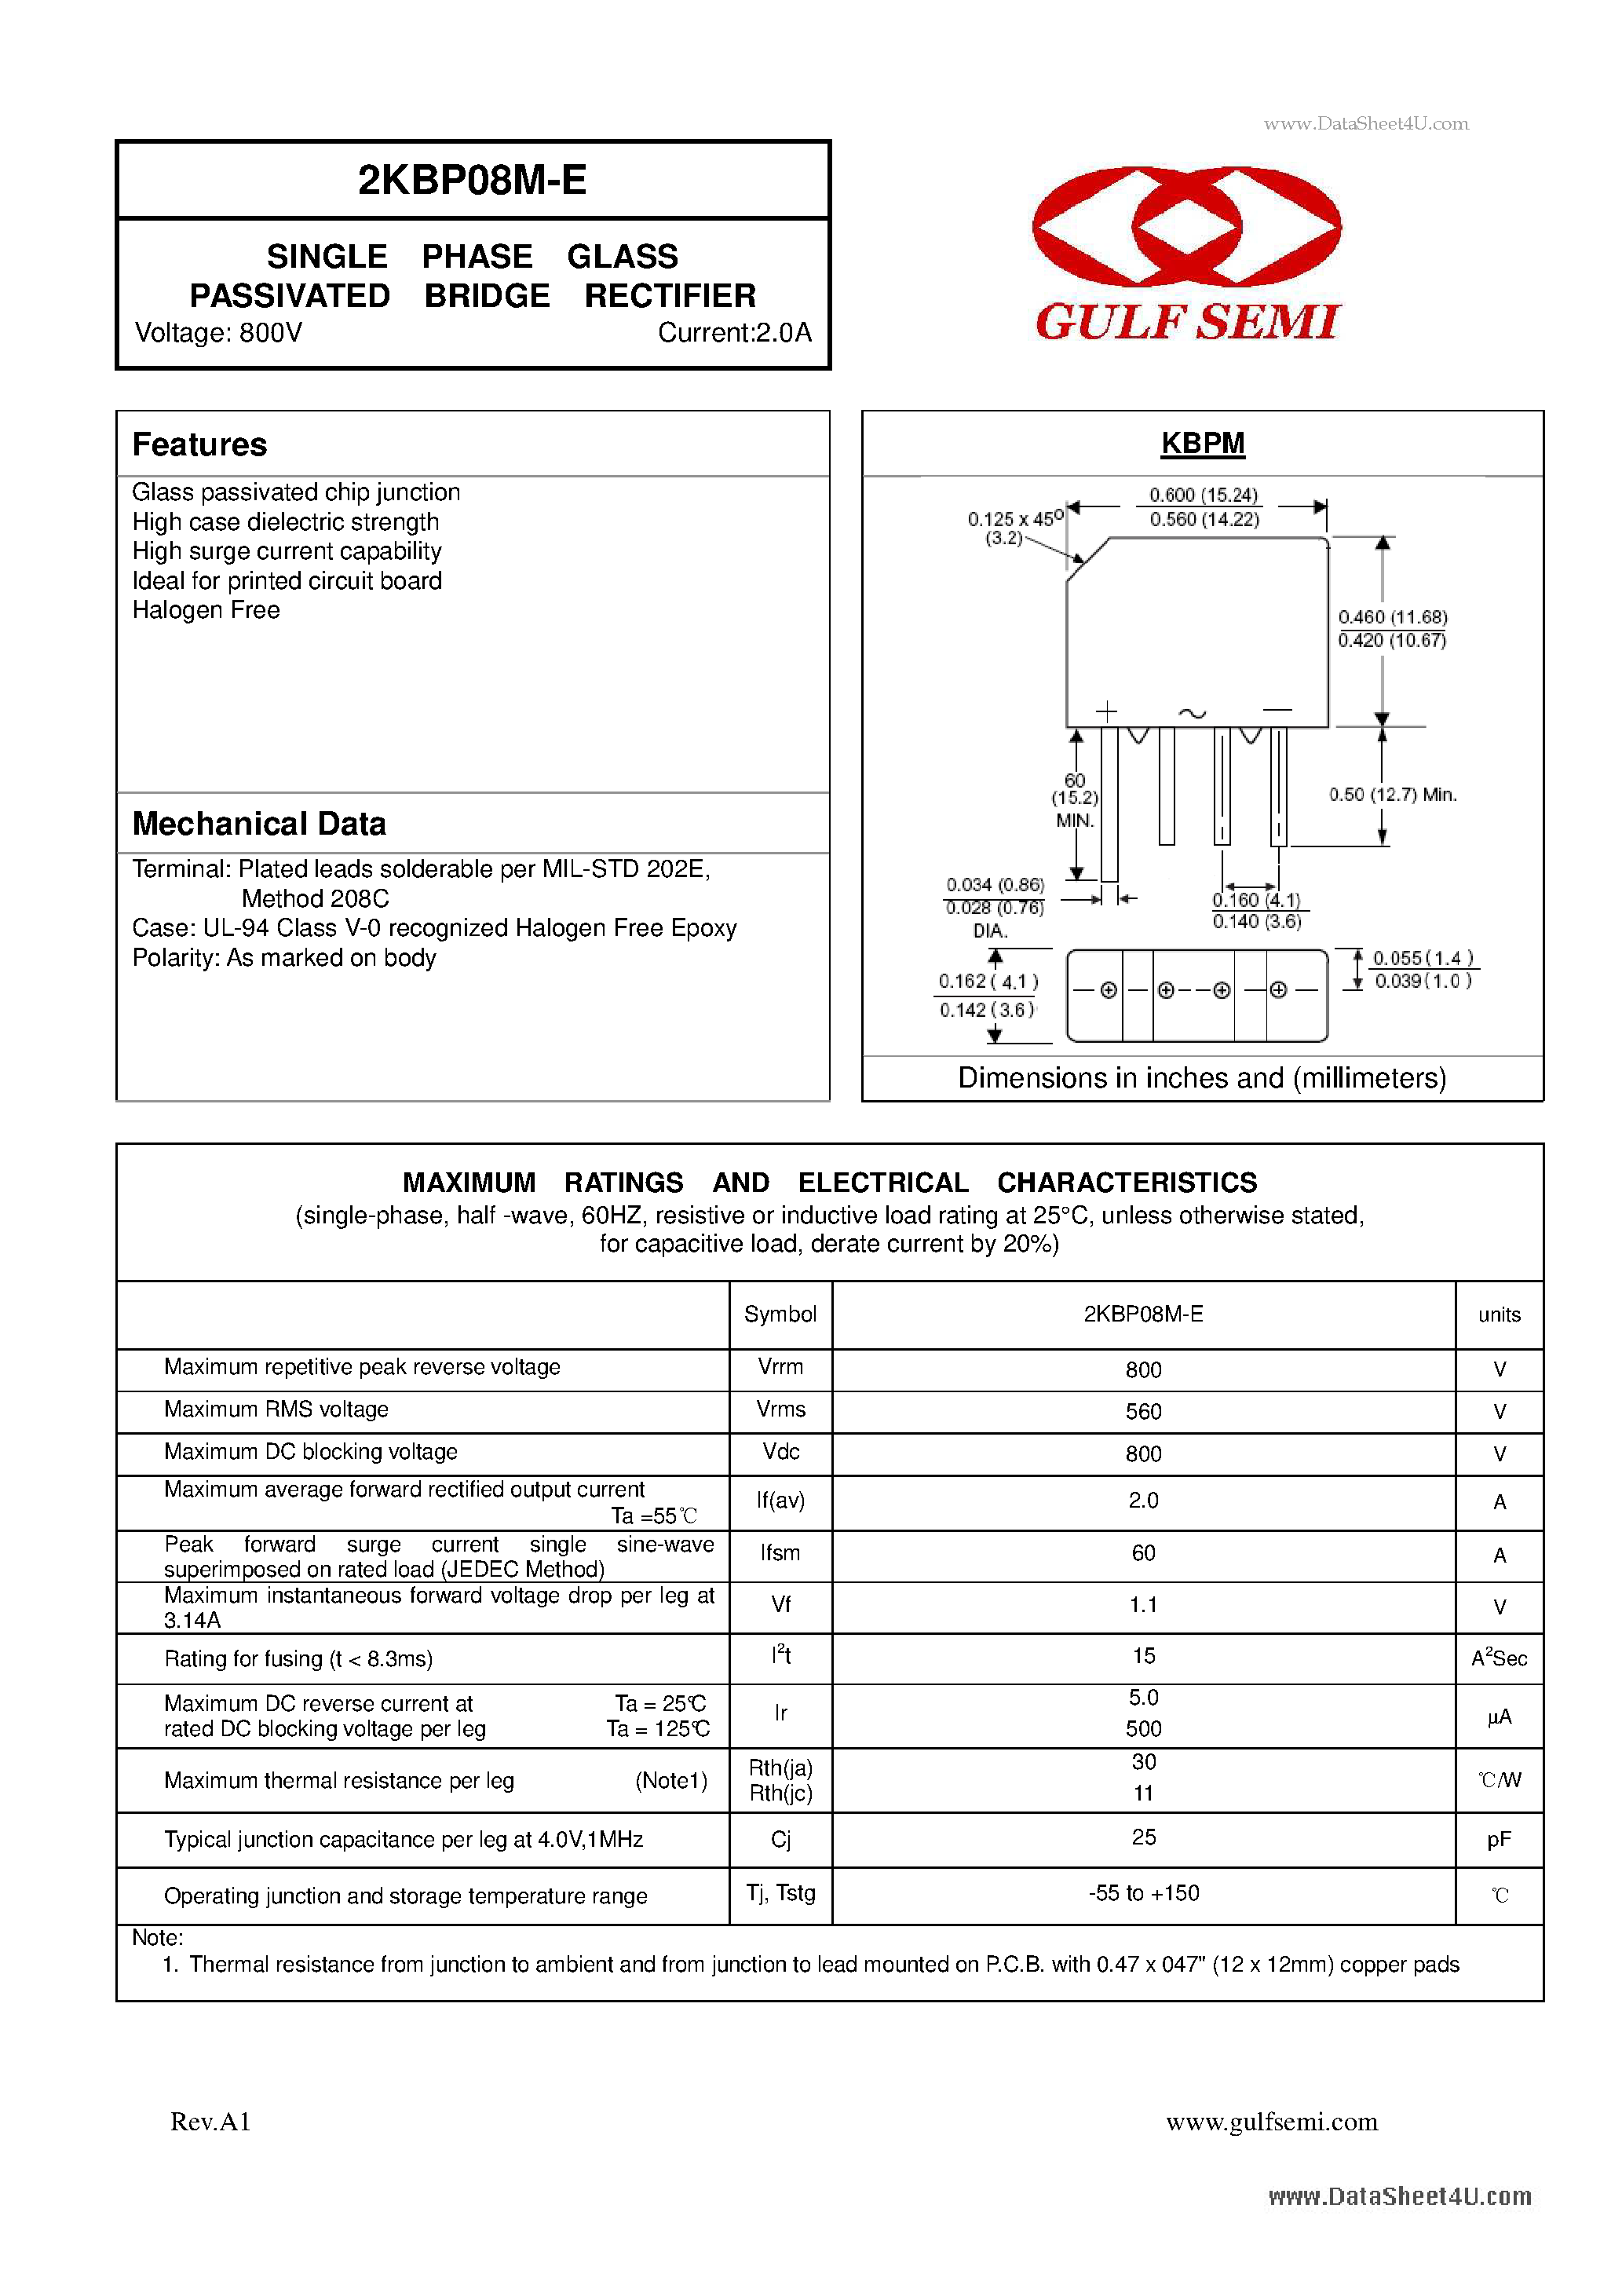 Datasheet 2KBP08M-E - SINGLE PHASE GLASS PASSIVATED BRIDGE RECTIFIER Voltage: 800V Current:2.0A page 1